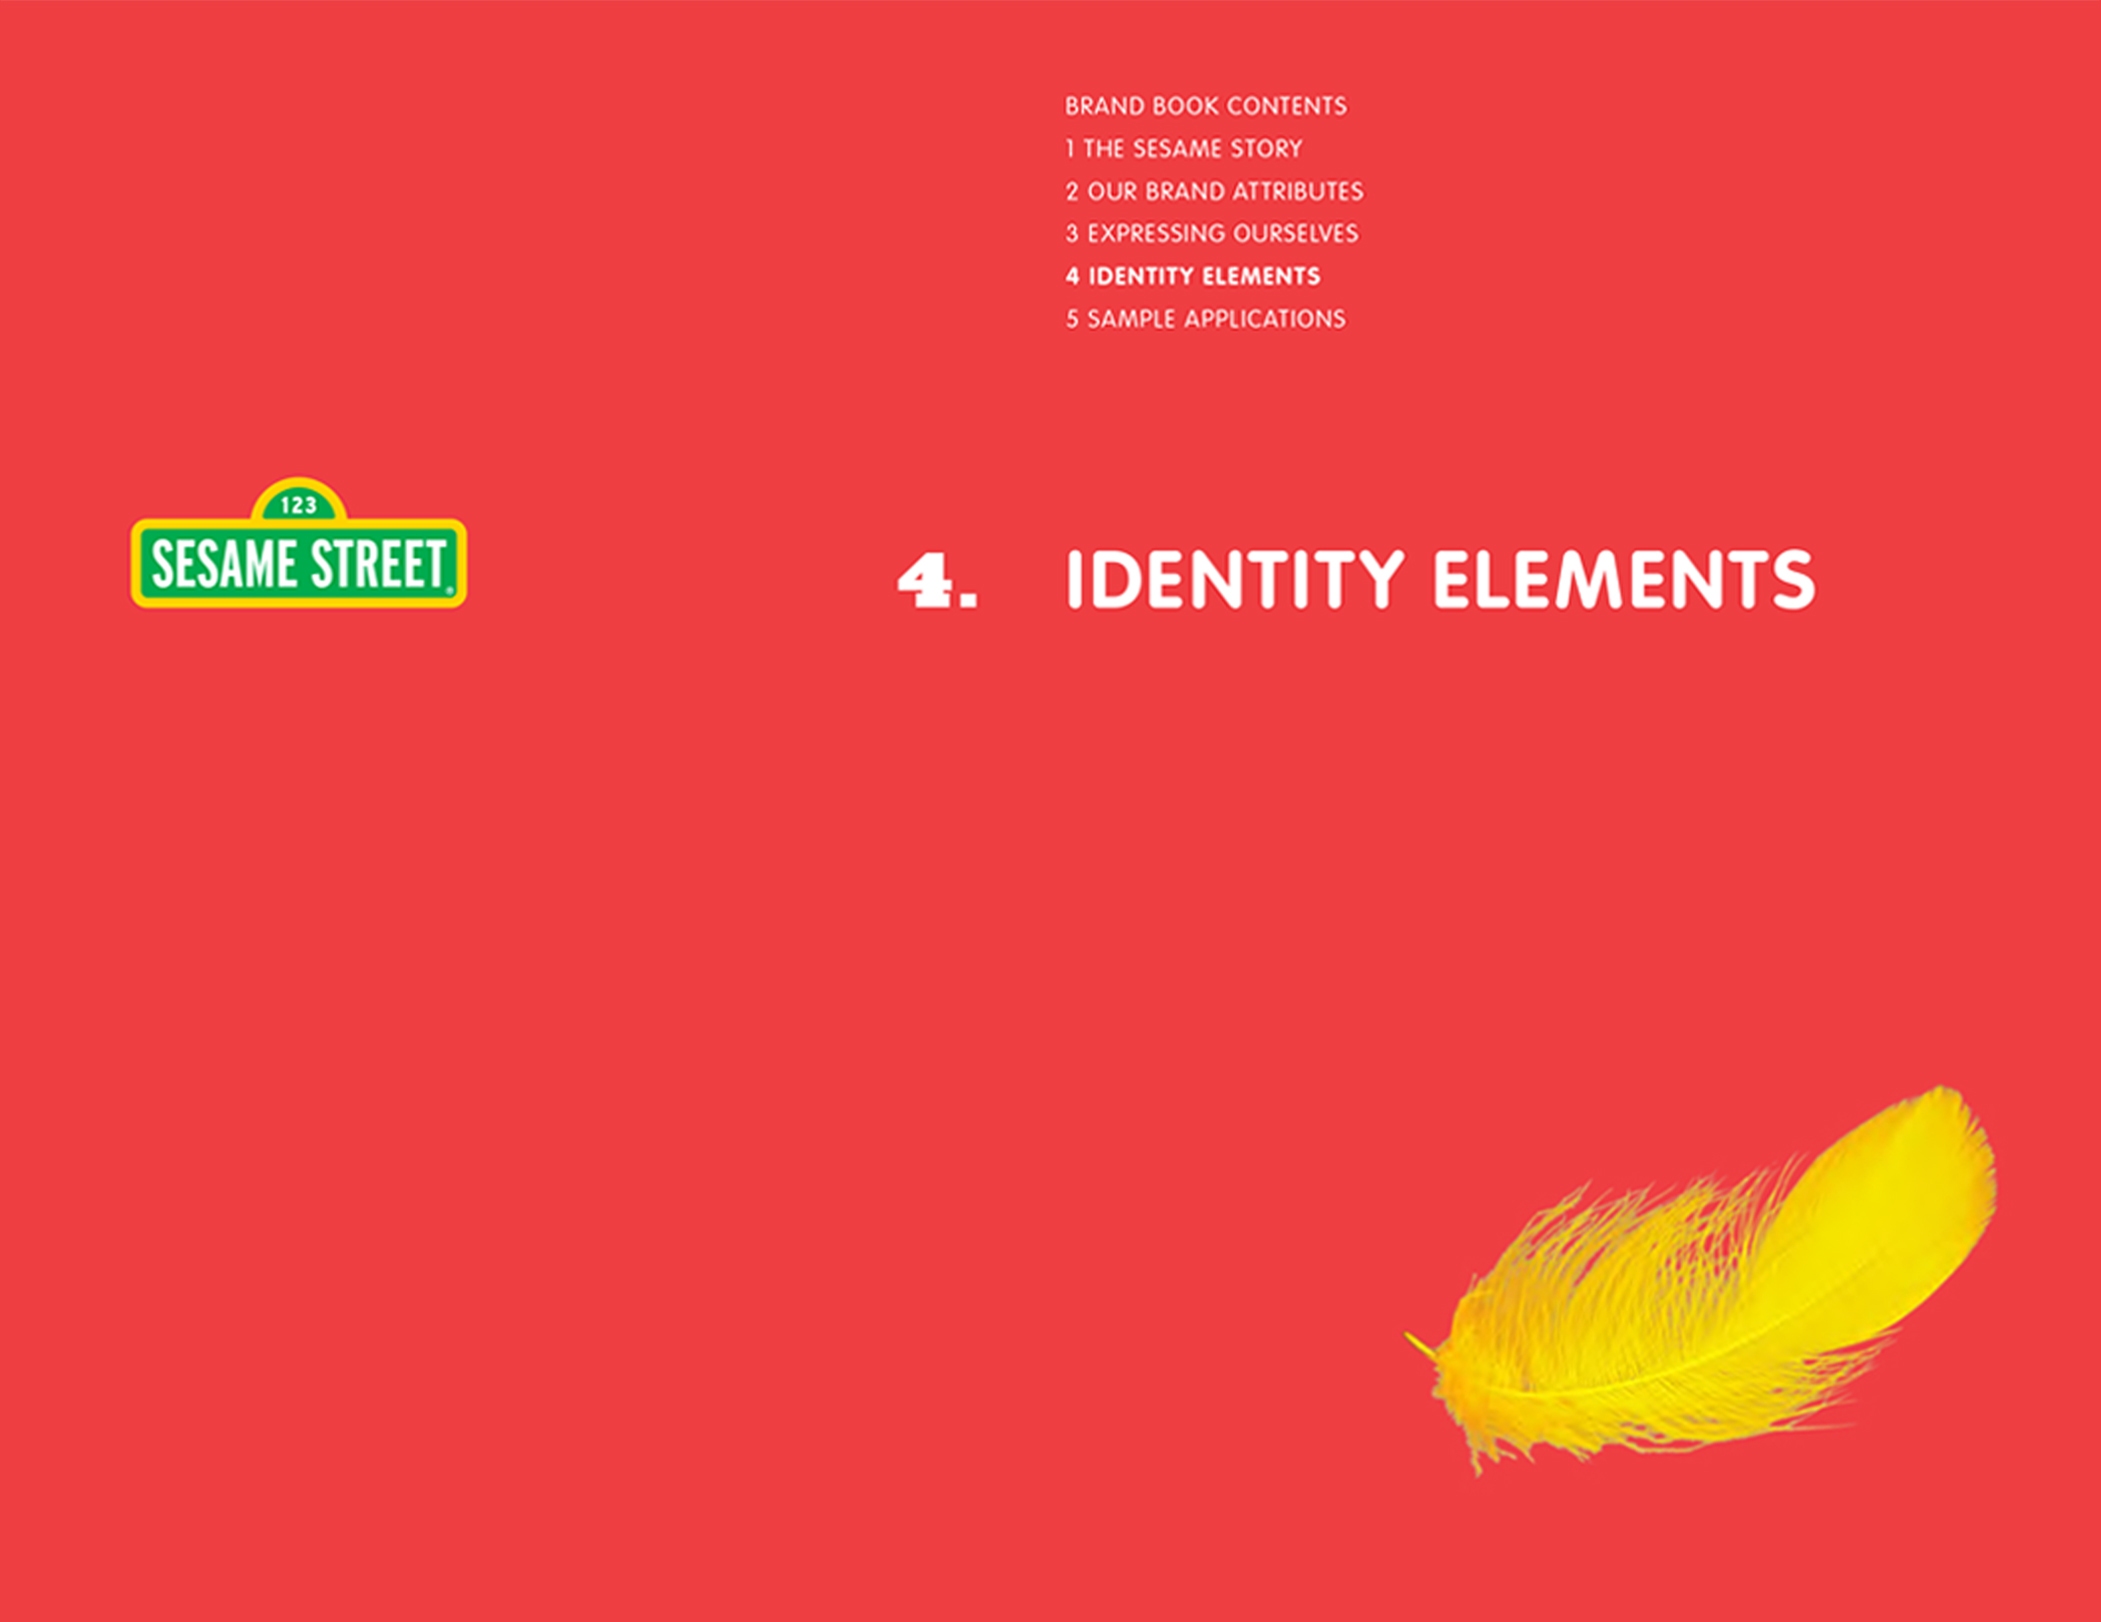 The identity elements cover pages from the Sesame Workshop Brand Book with a yellow feather on a bright red background.